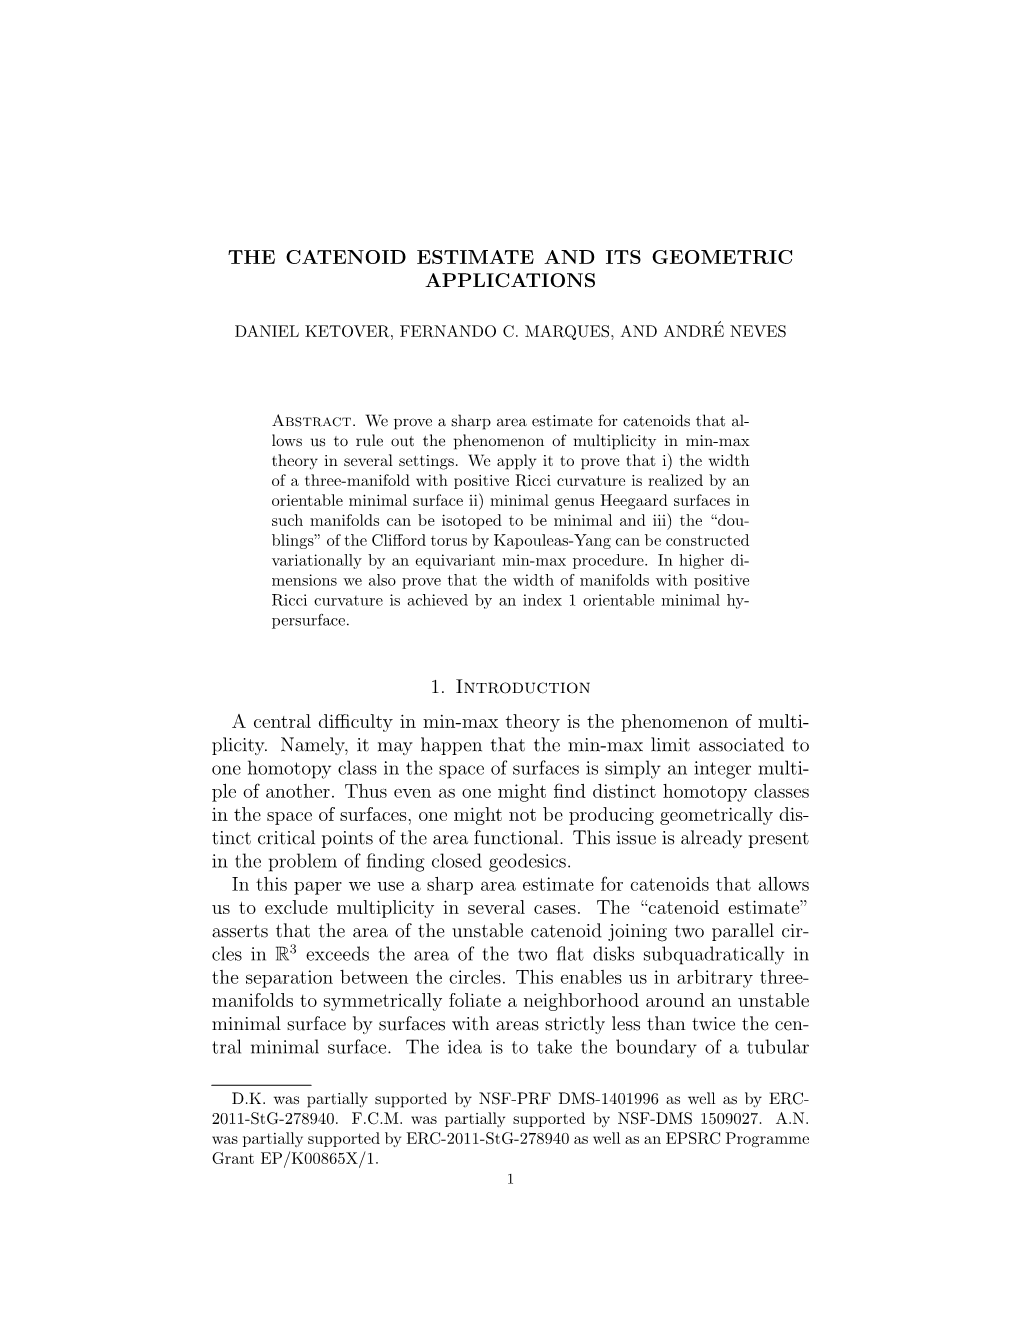 The Catenoid Estimate and Its Geometric Applications 11